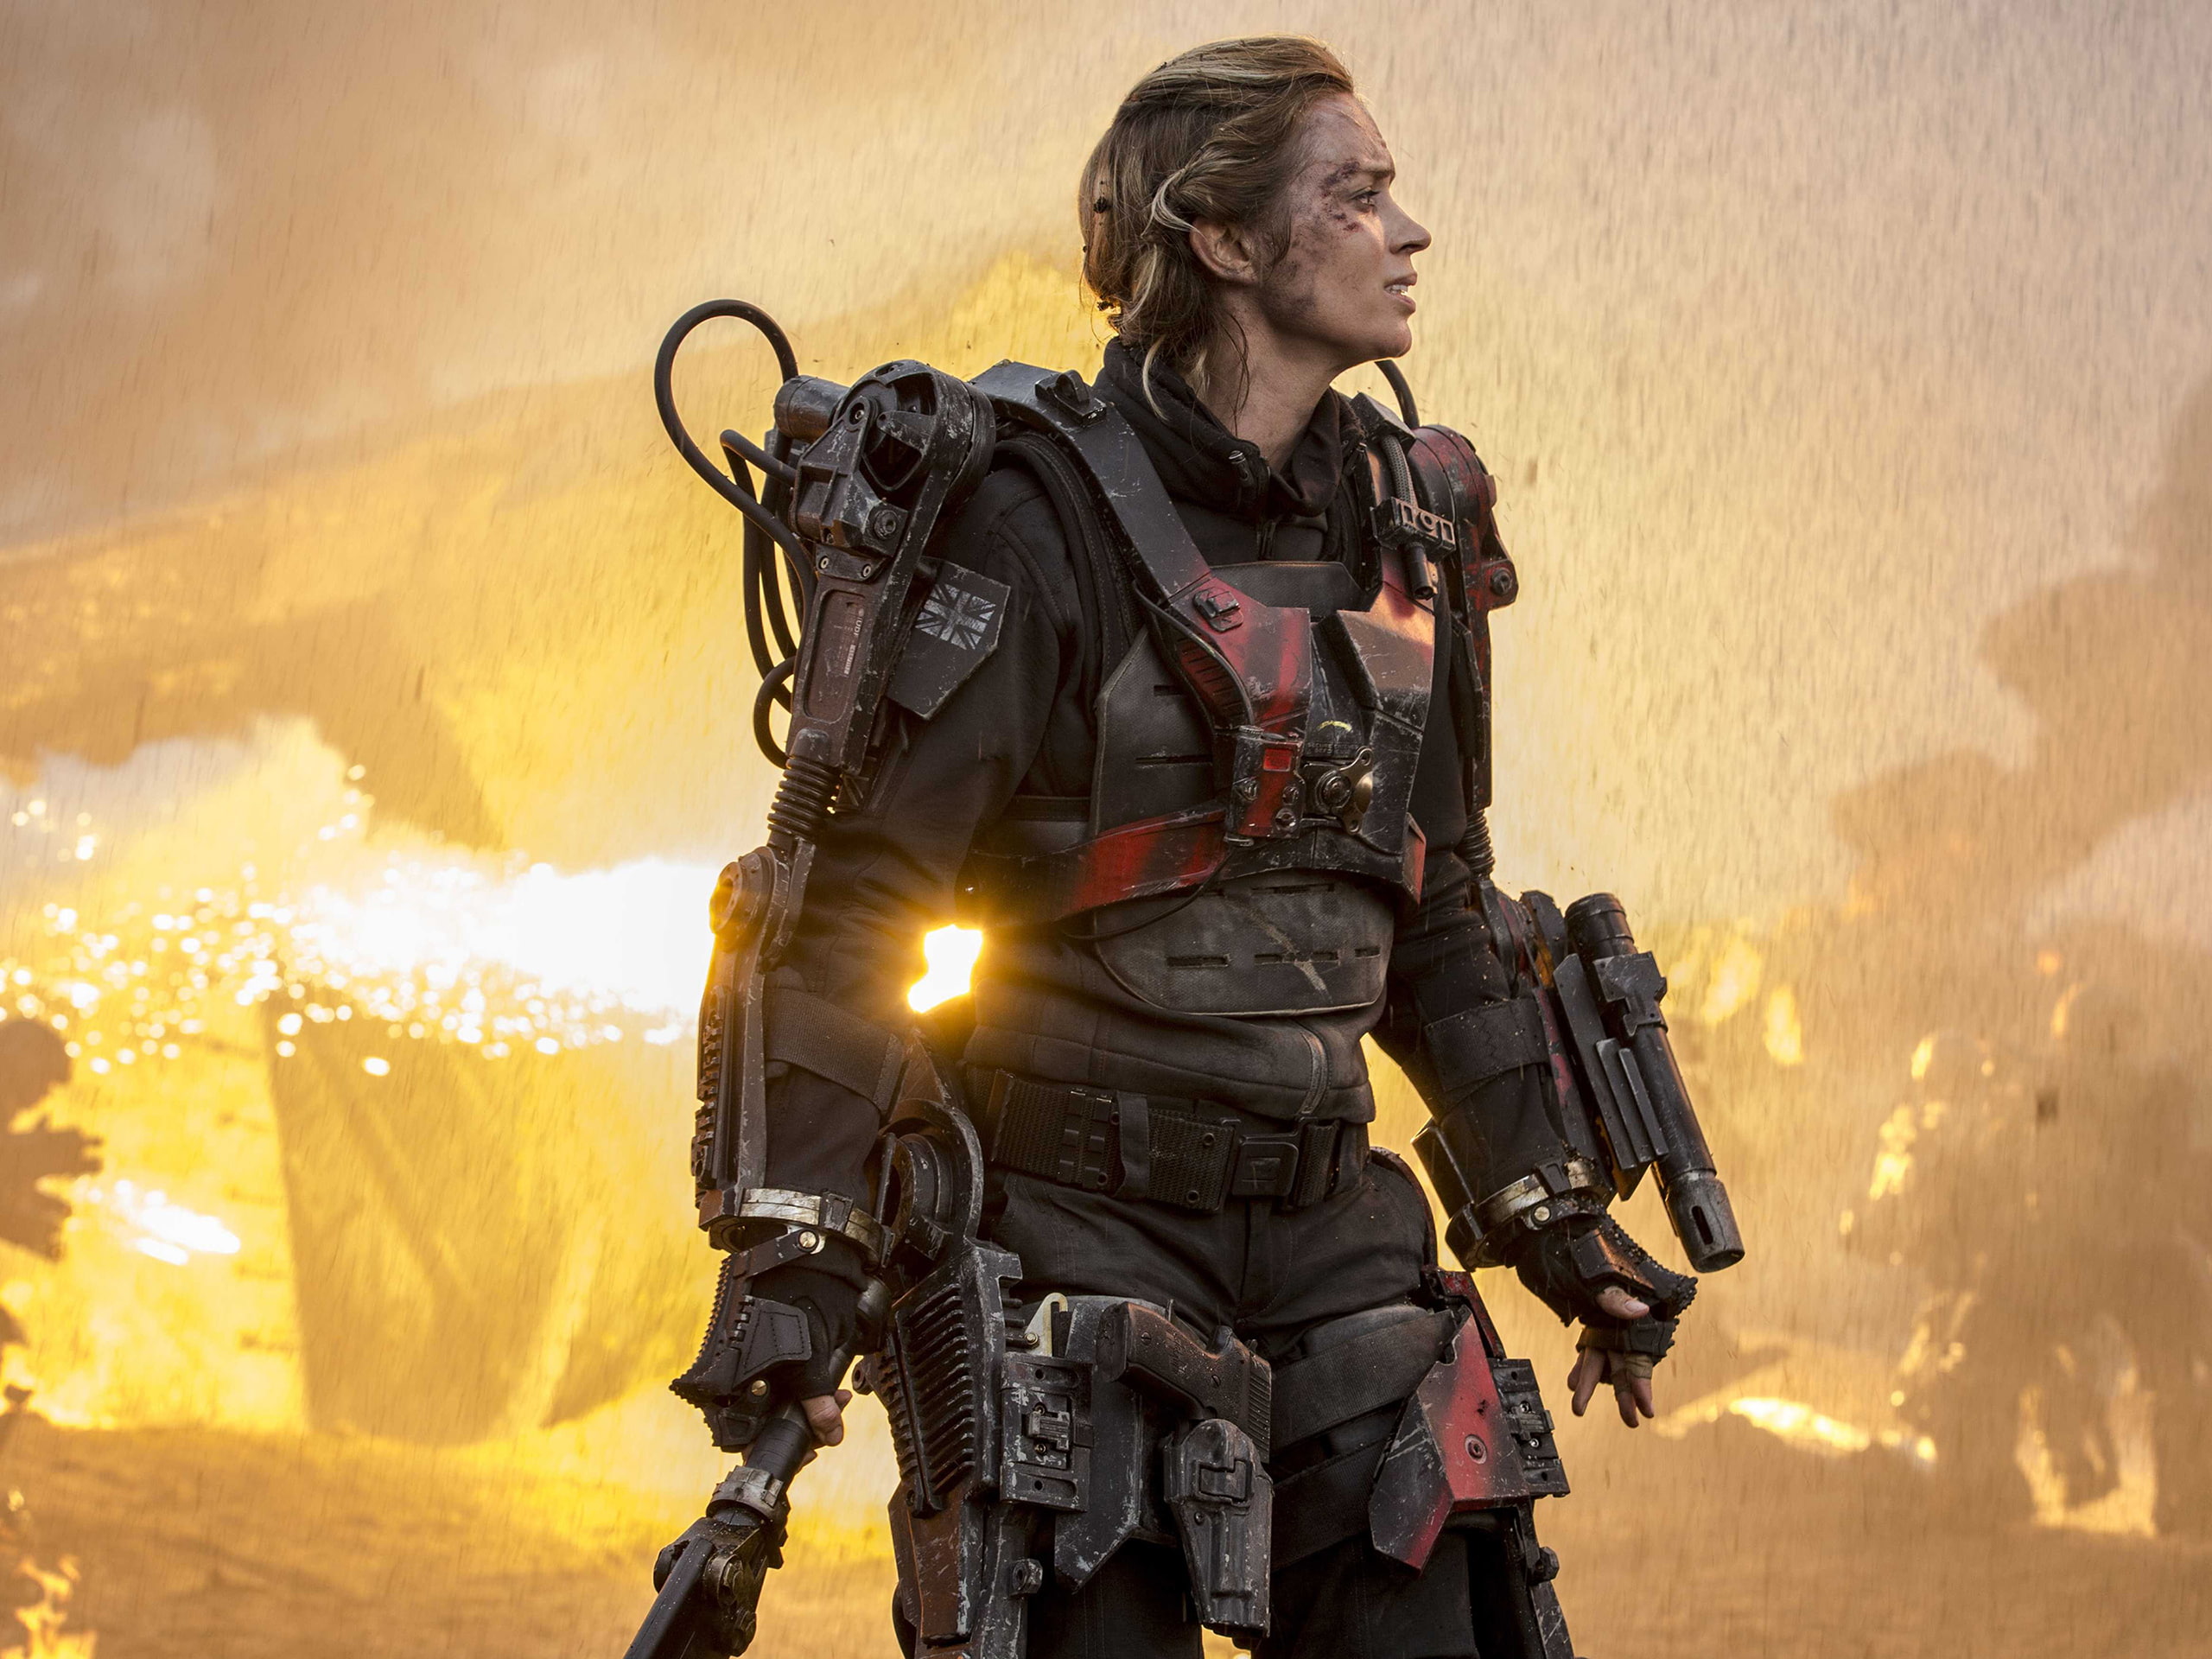 Edge of Tomorrow Emily Blunt HD, female movie character with guns